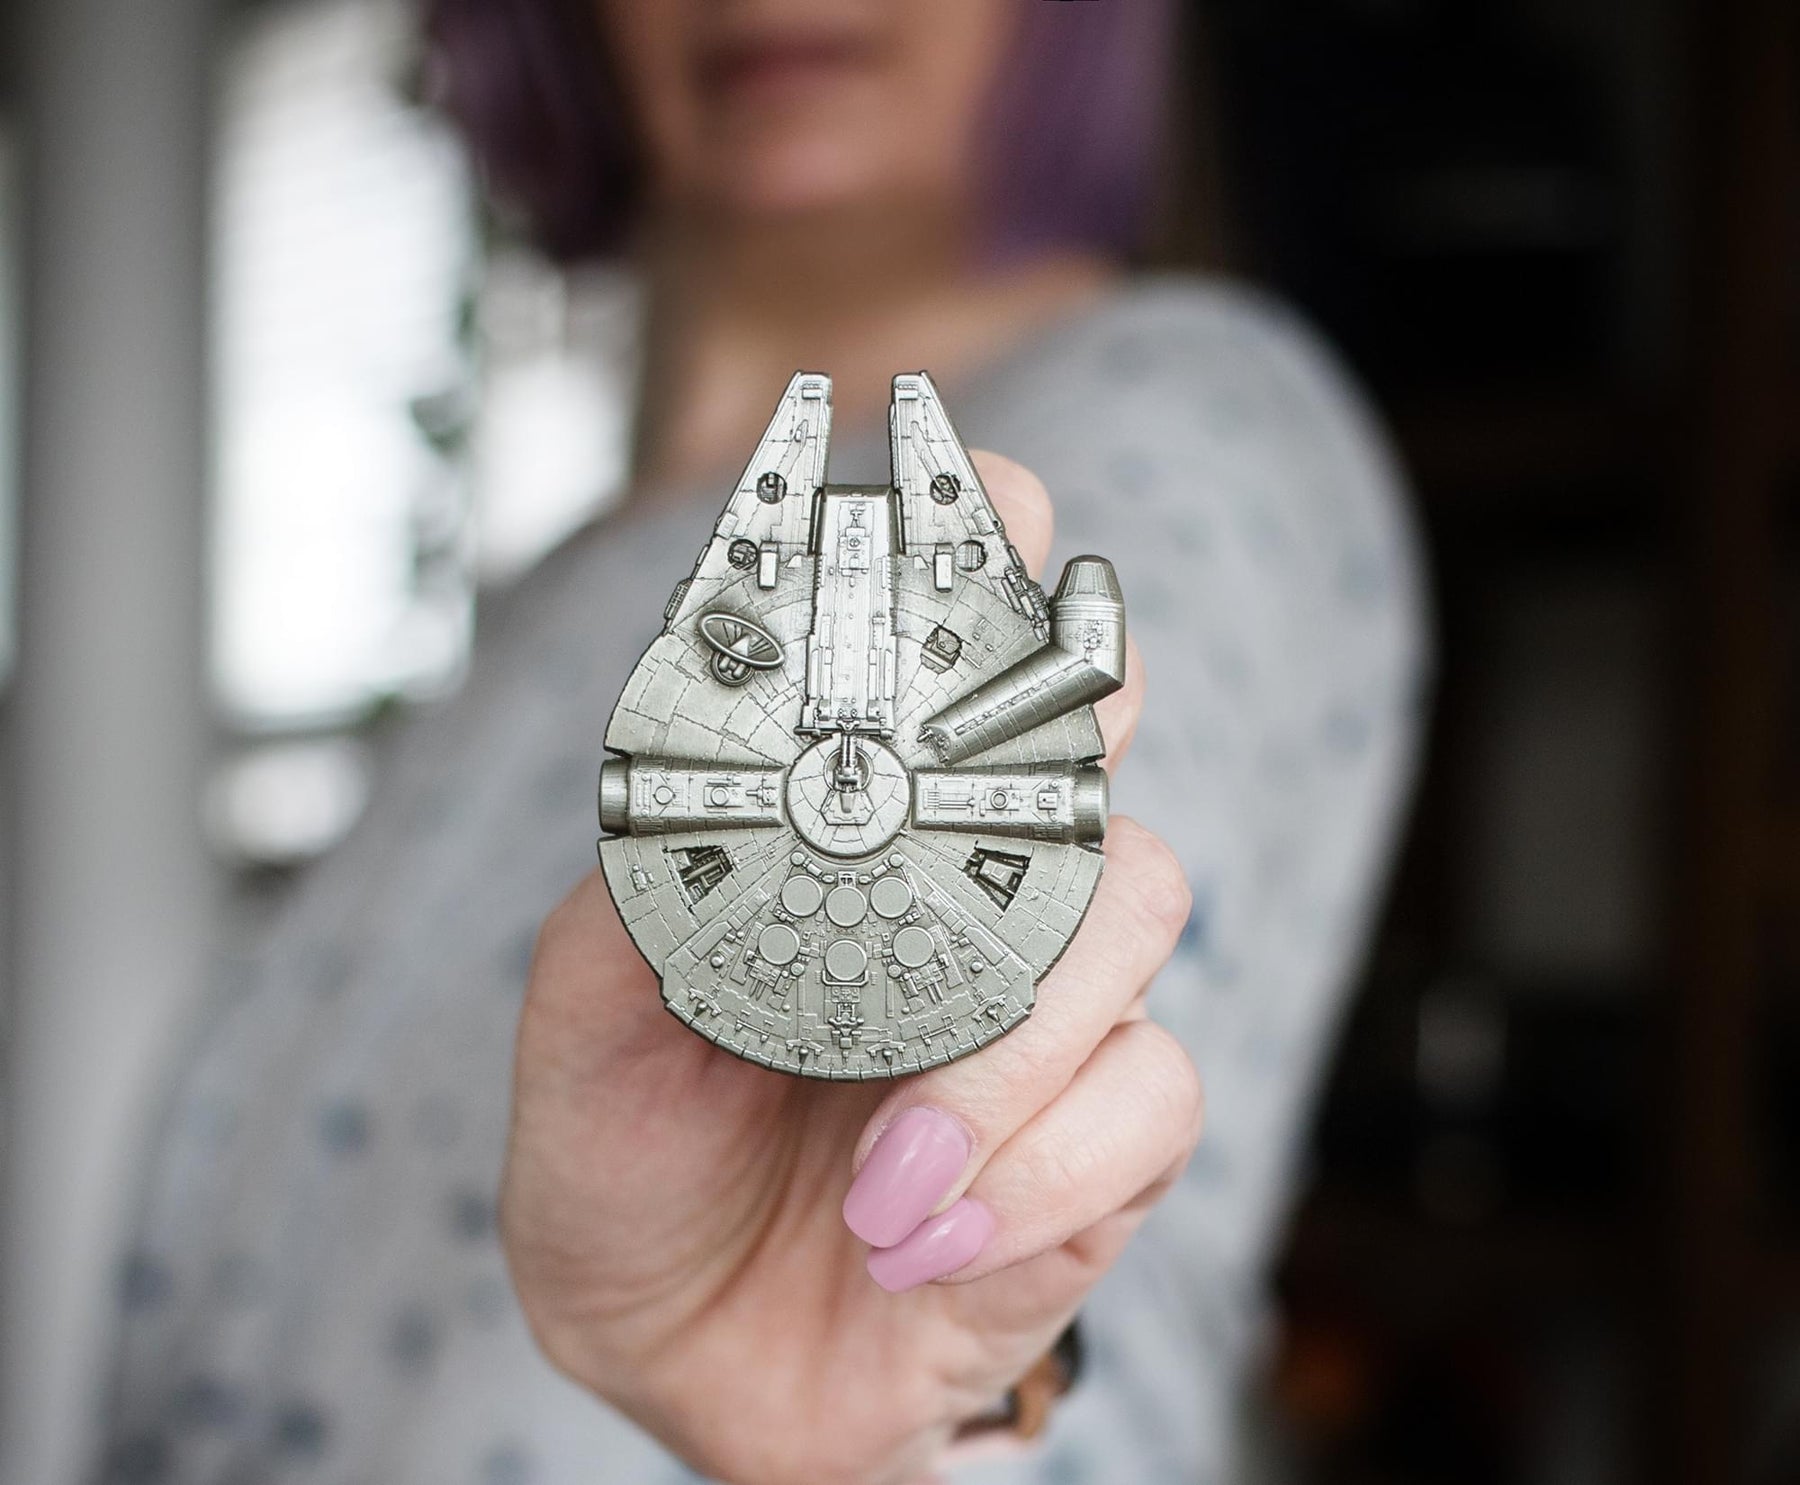 Star Wars Millennium Falcon Collector Metal Pin | 3 x 2 Inches | Toynk Exclusive